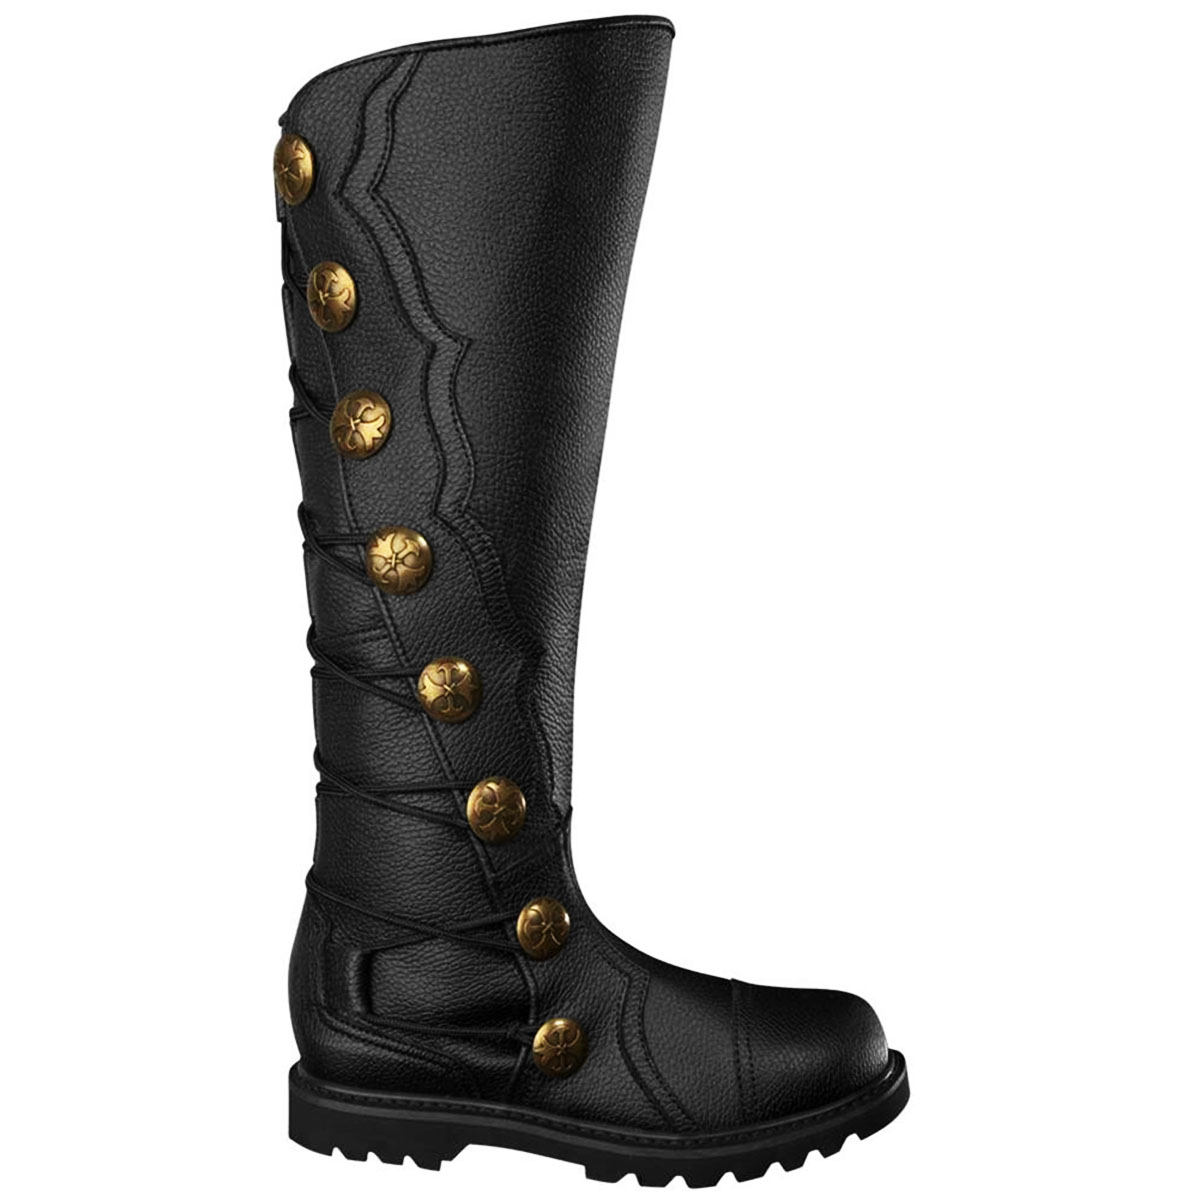 silk Tears Normal Premium Black Leather Knee-High Boots are soft and durable